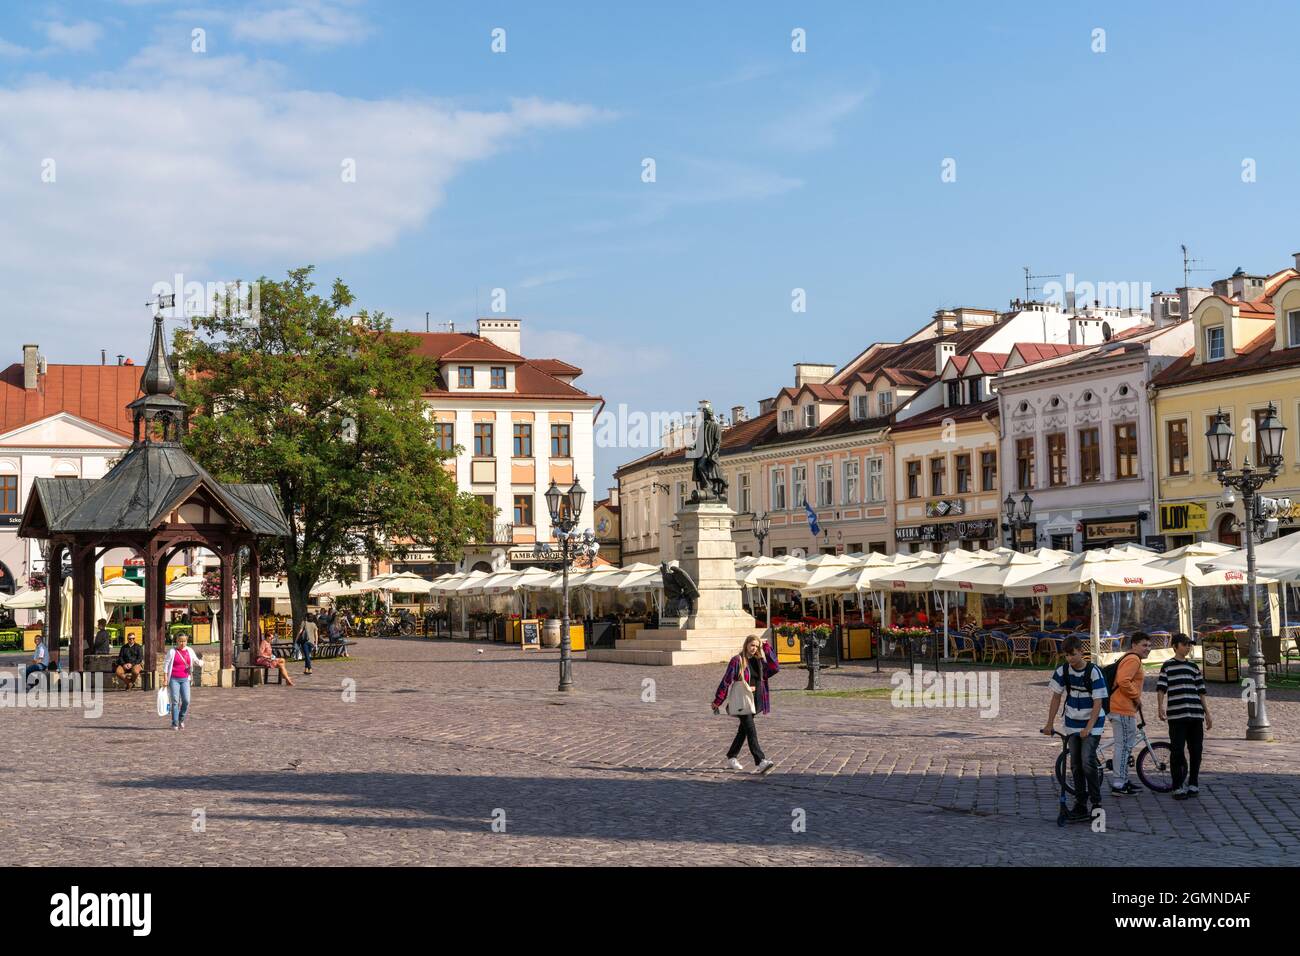 Rzeszow, Poland - 14 September, 2021: view of the market square in the historic old town city center of Rzeszow Stock Photo